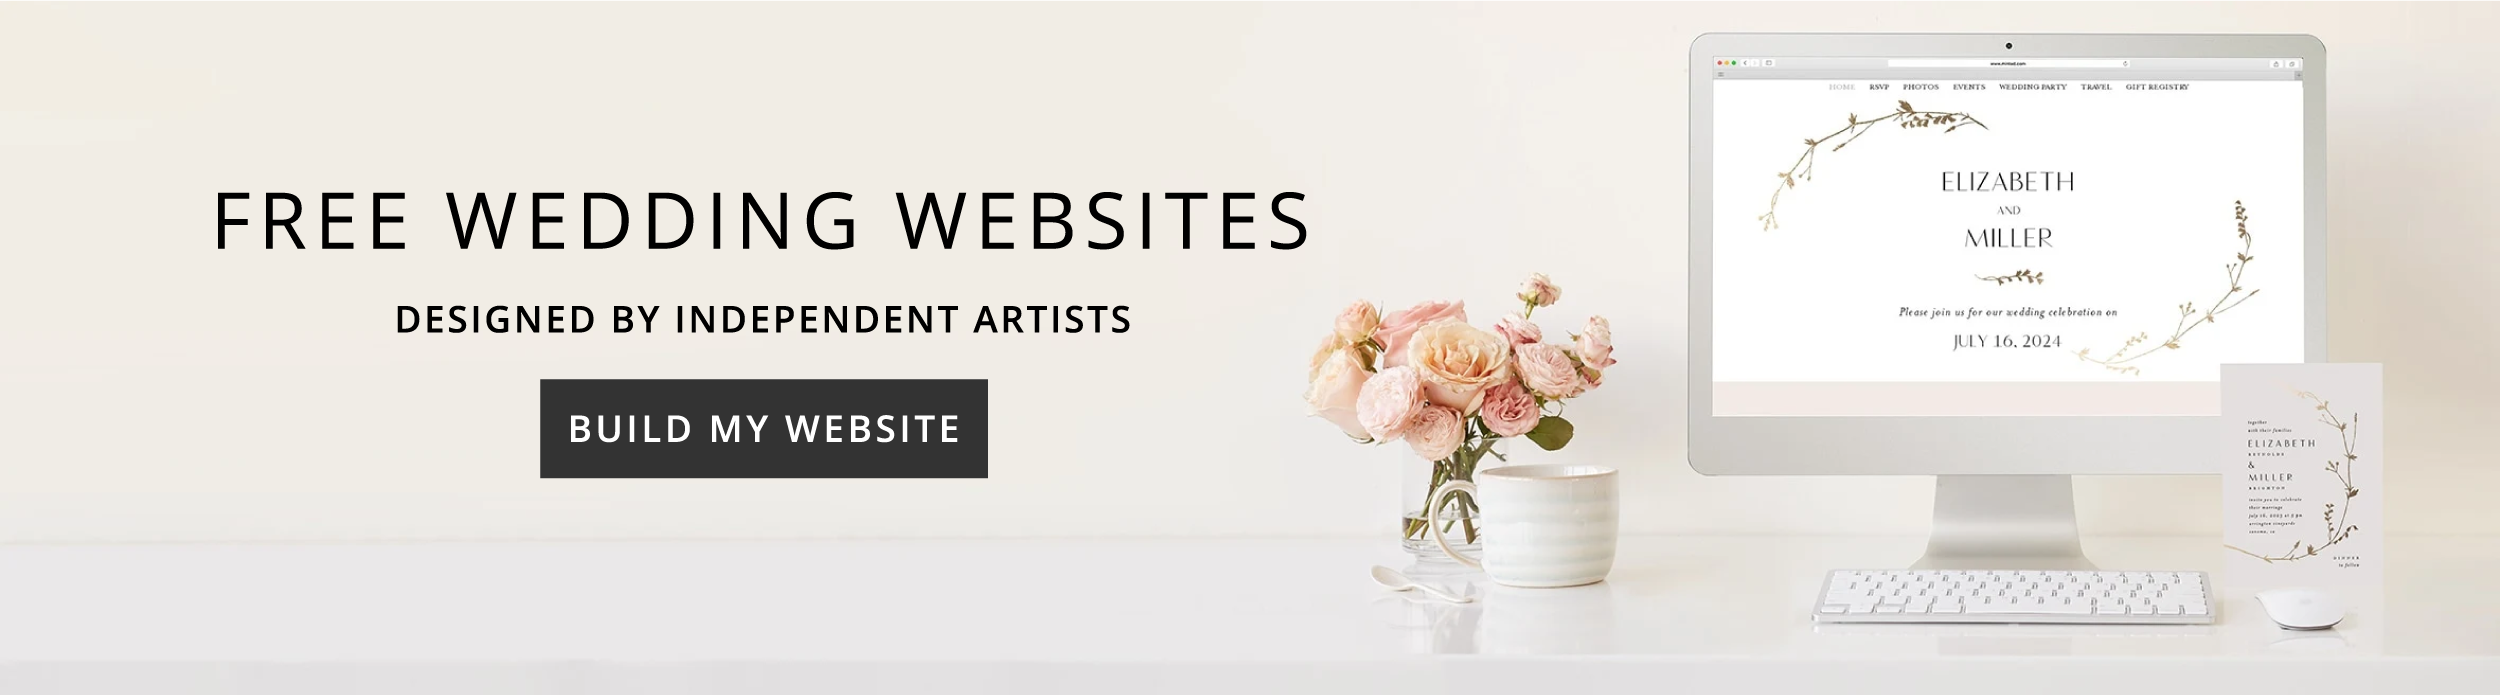 Free Wedding Websites from Minted.